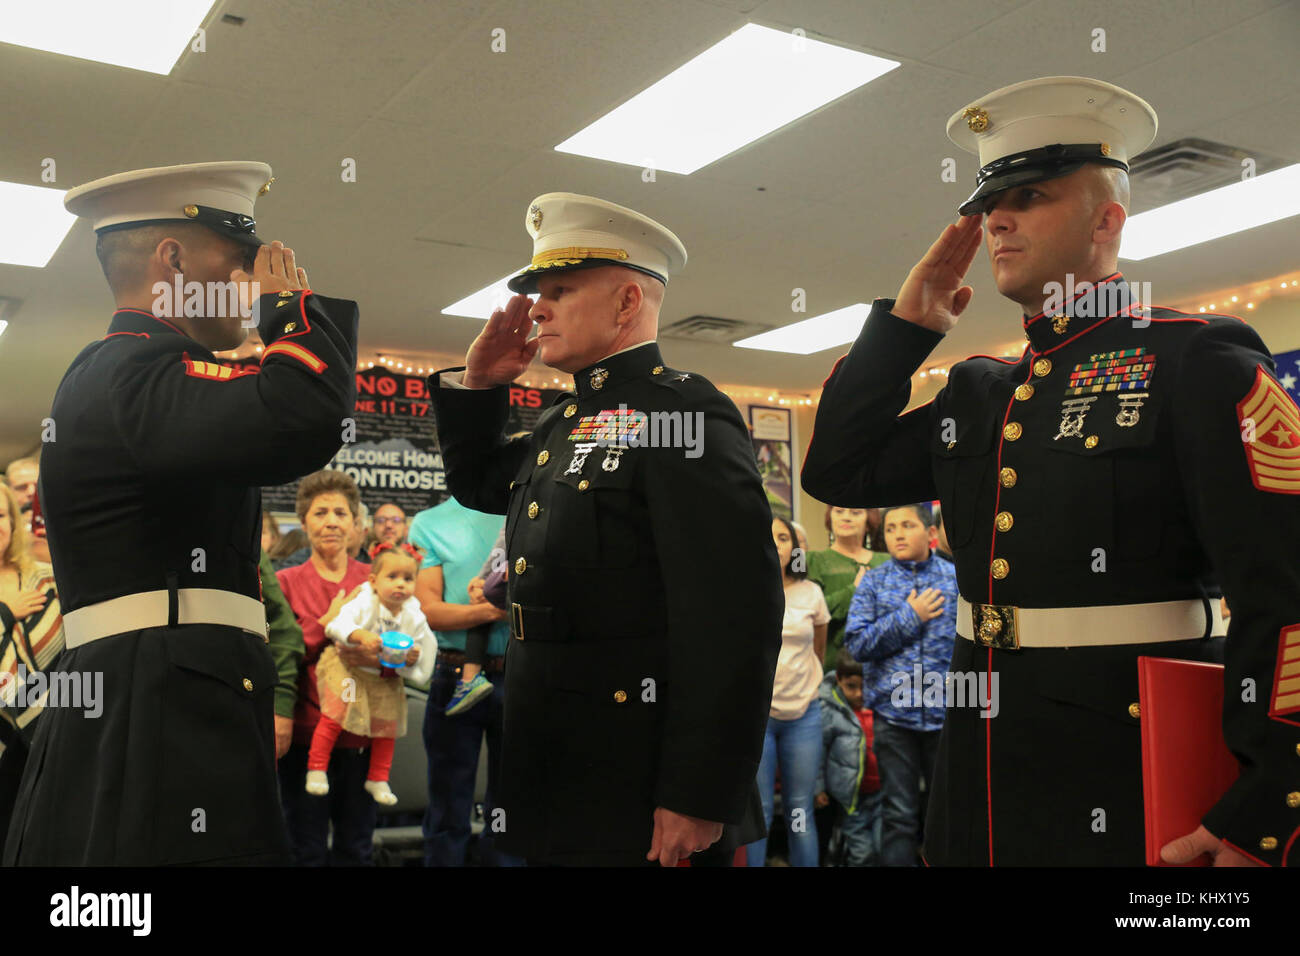 Marine Corps veteran Sgt. Eubaldo Lovato (left), Silver Star recipient, Brig. Gen. Michael Martin (center), deputy commanding general of Marine Corps Forces Command, and Sgt. Maj. Bryan Fuller, Inspector Instructor Sgt. Maj. of Combat Logistics Group 453 Sgt. Maj., 4th Marine Logistics Group, render honors during the playing of the National Anthem during the Silver Star award ceremony in Montrose, Colo., Nov. 18, 2017. Lovato received an award upgrade, from his previous Bronze Star, for his heroic actions while serving as a squad leader with Company A, 1st Battalion, 8th Marine Regiment, 1st M Stock Photo